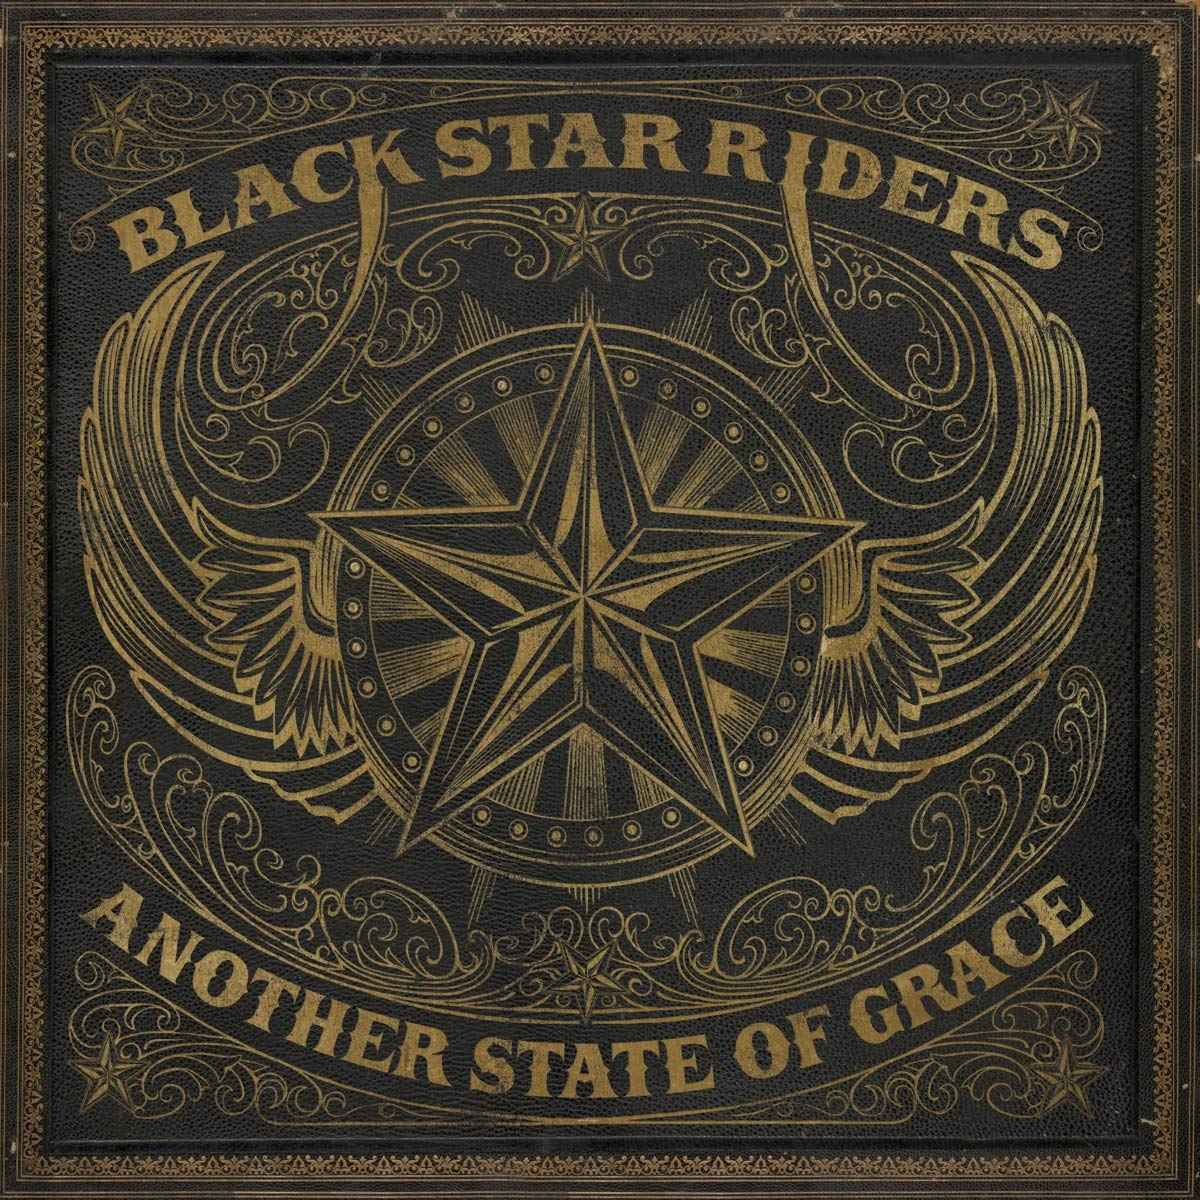 Black Star Riders "Another State Of Grace" CD